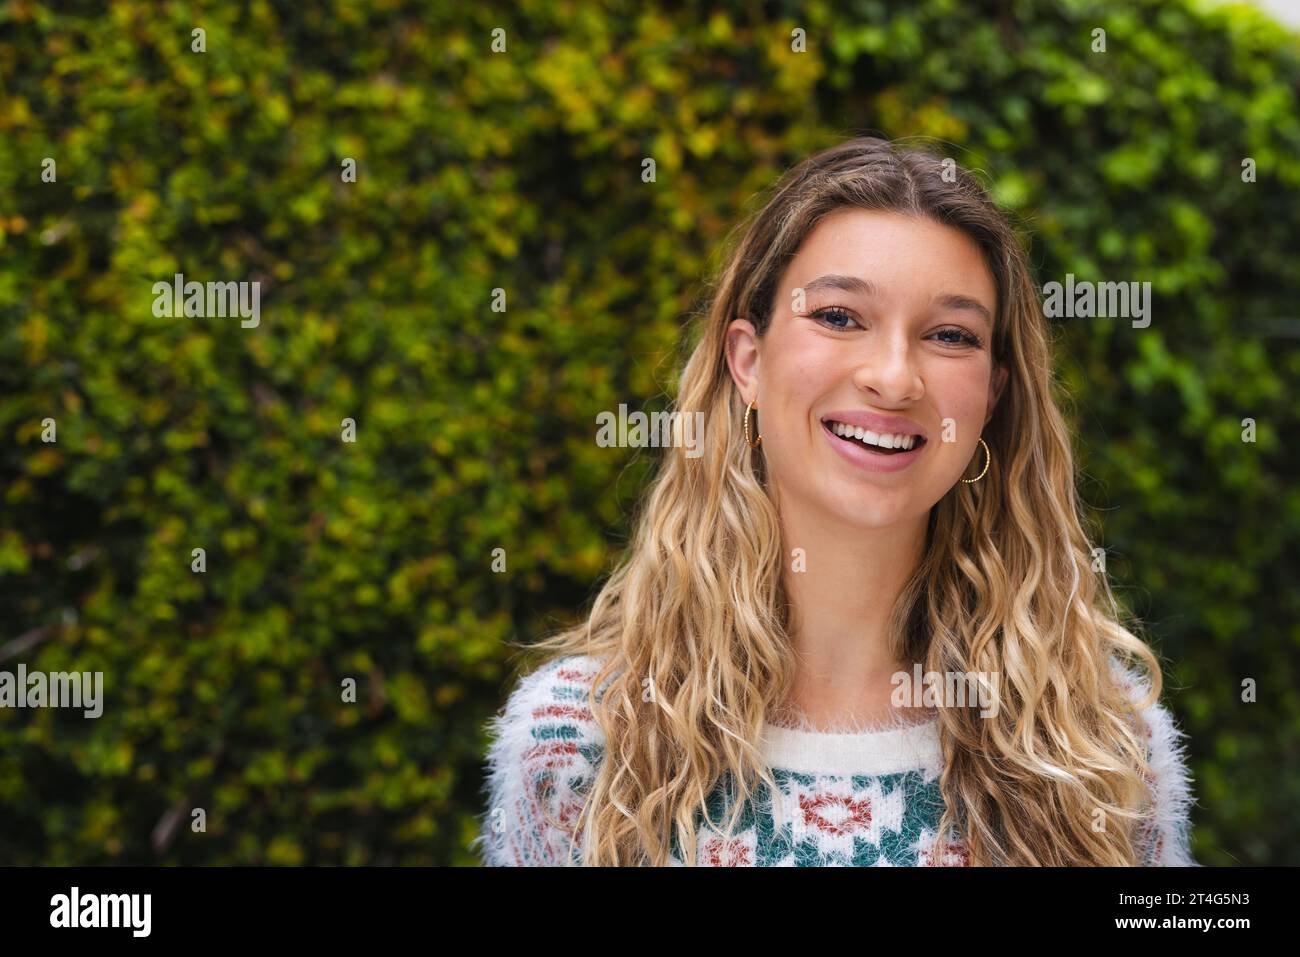 Portrait of happy caucasian woman with long blonde hair smiling in garden, copy space Stock Photo